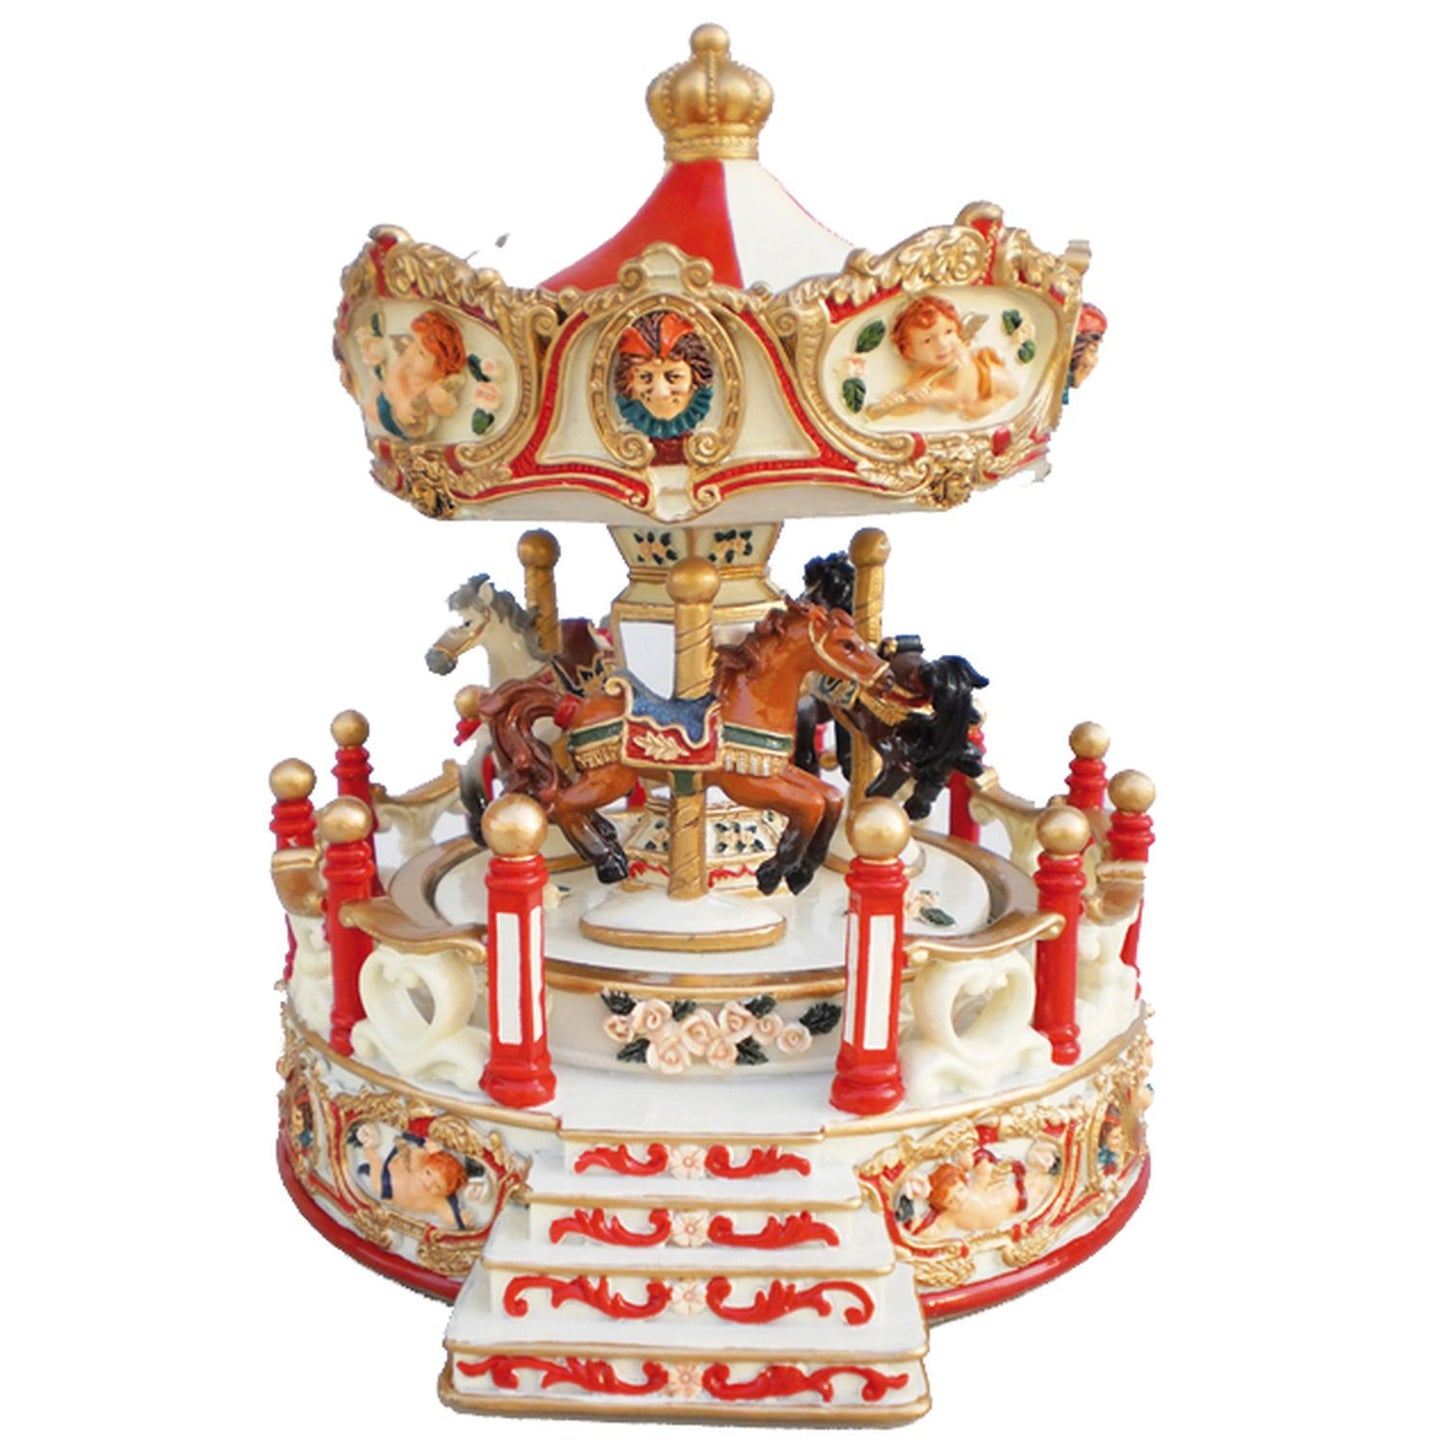 Musicbox Kingdom 6.7" Angel Carousel Red Turns To The Melody Moonlight Sonata.